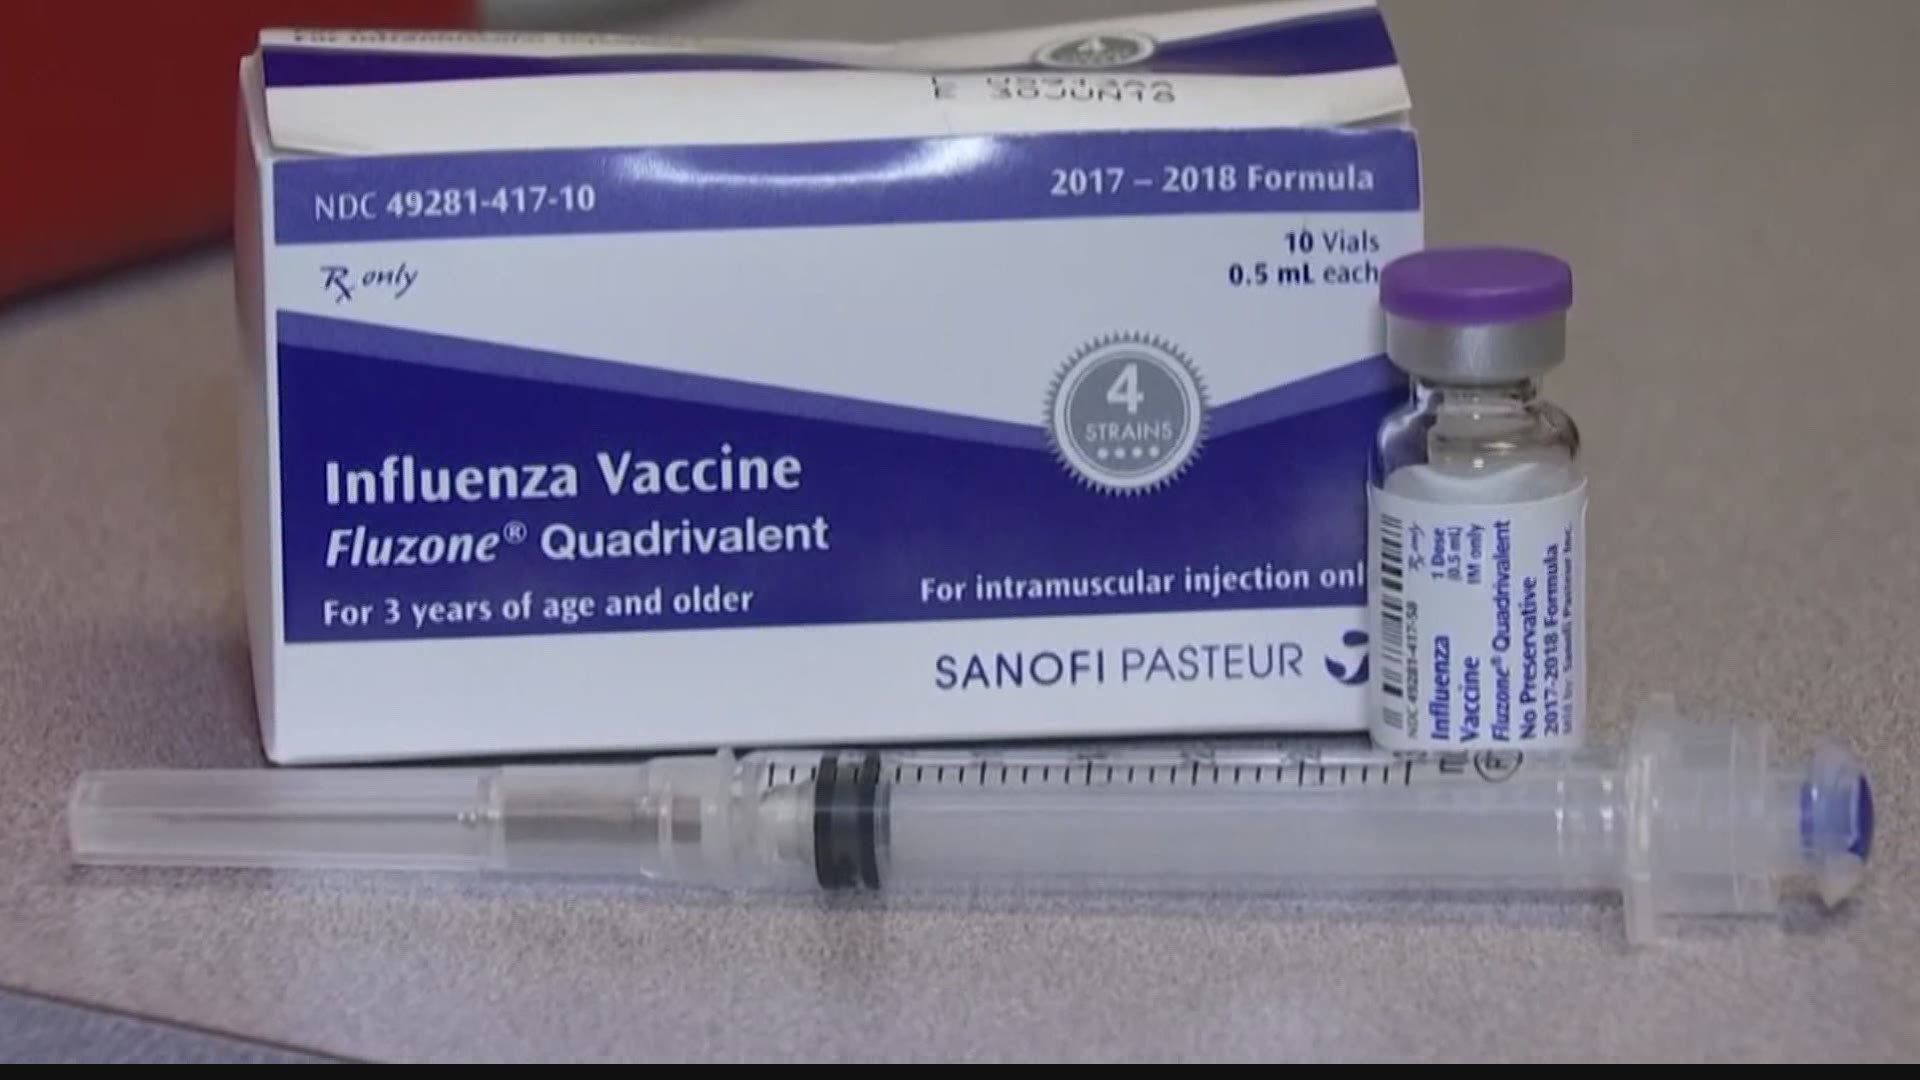 Doctors are encouraging people to get their flu shots this year amid the coronavirus pandemic. But when is the right time to get one?